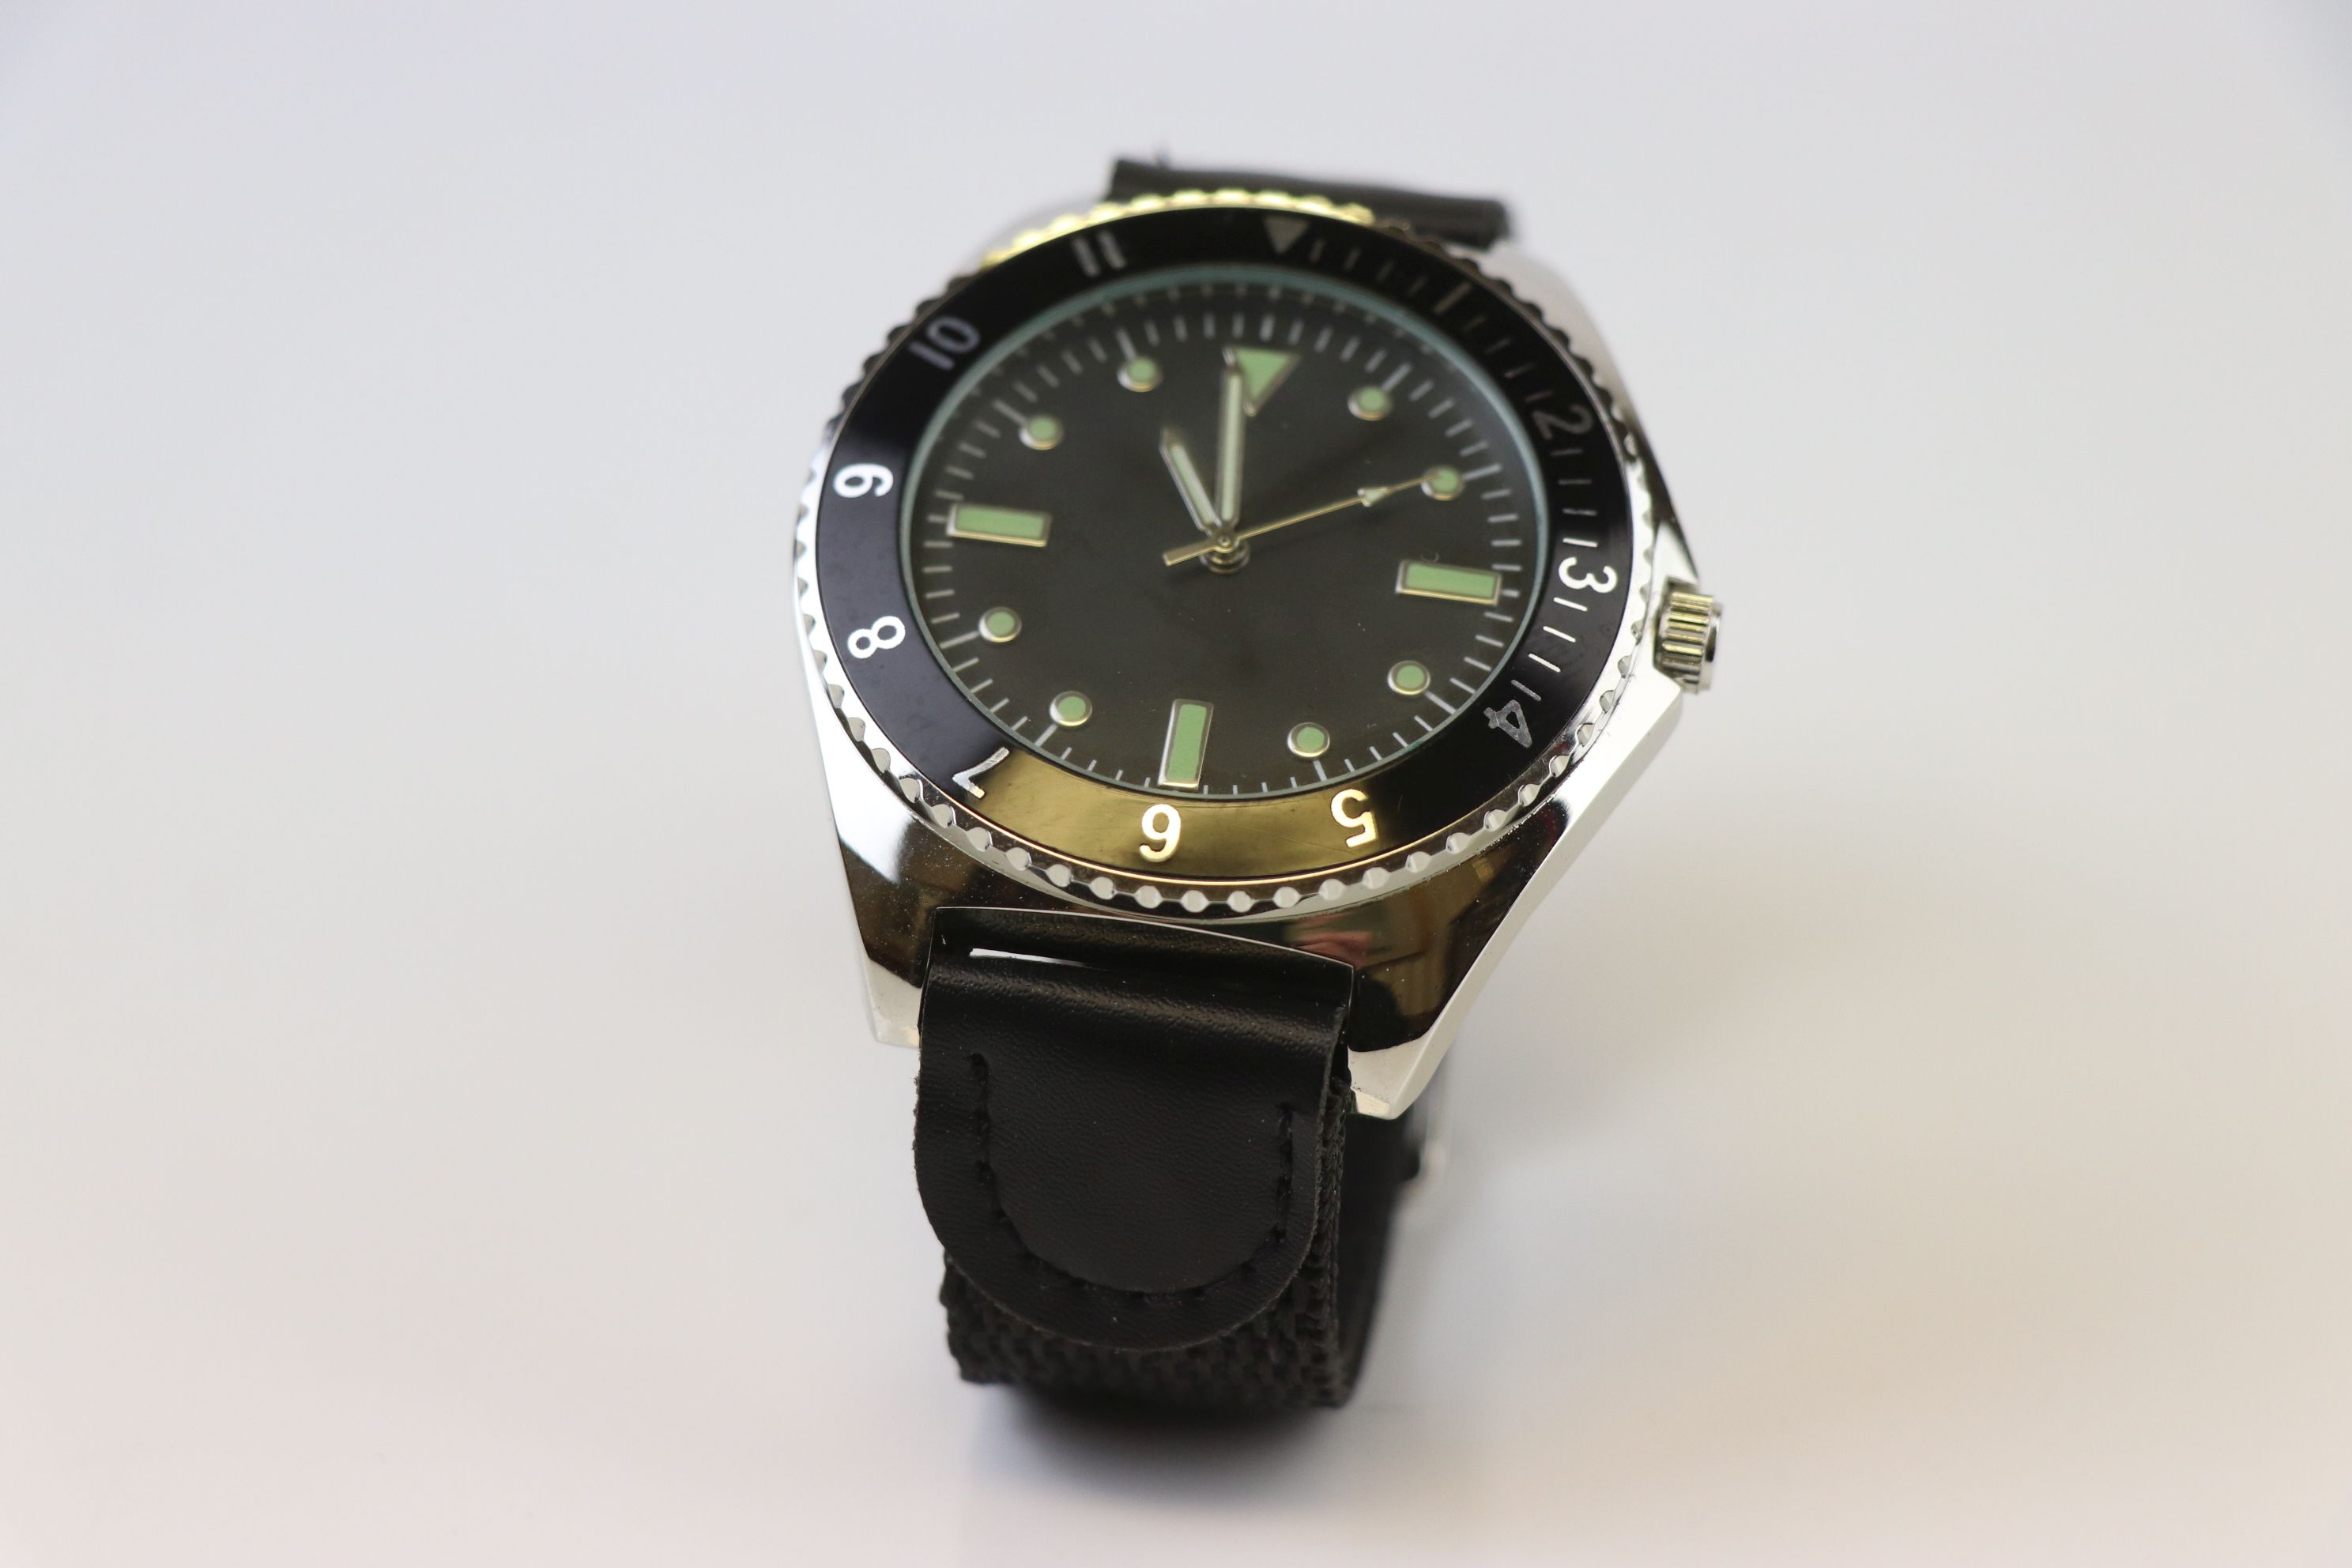 United States Navy Diver style Military Watch - Image 3 of 4